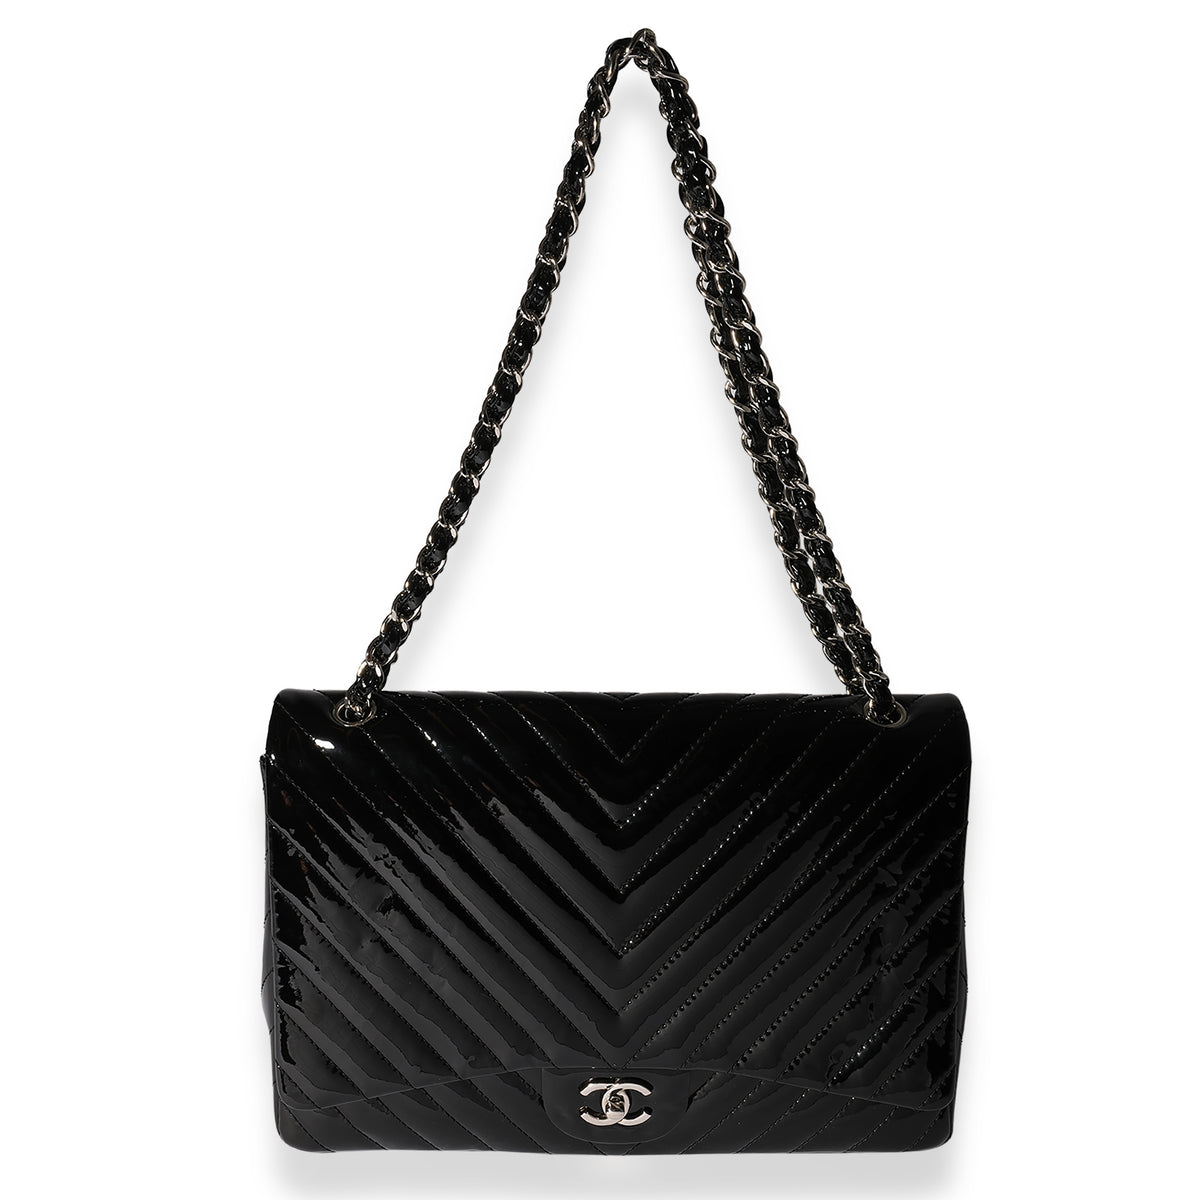 Chanel Black Patent Leather Chevron Quilted Maxi Classic Single Flap Bag